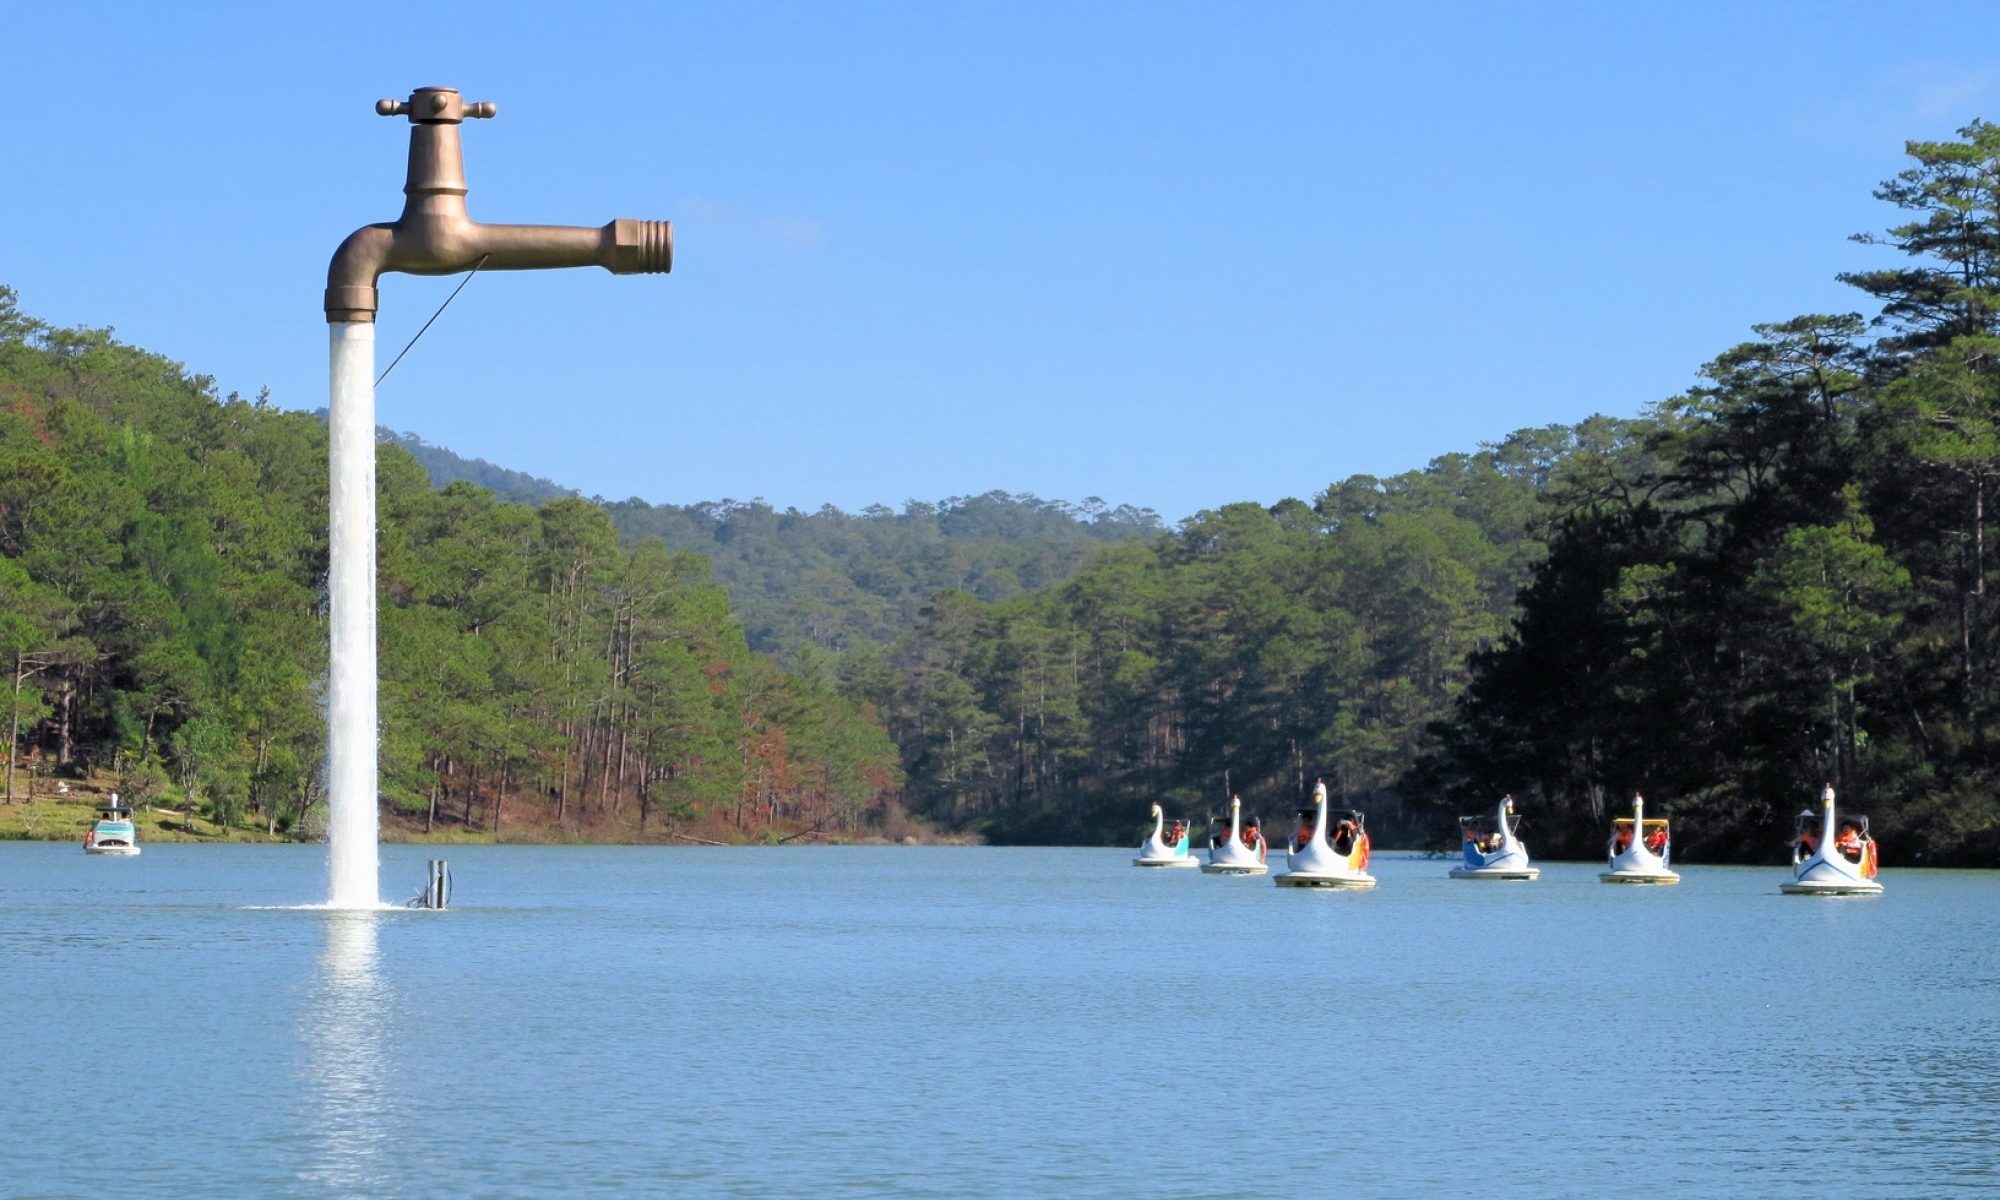 photograph of freestanding faucet on lake